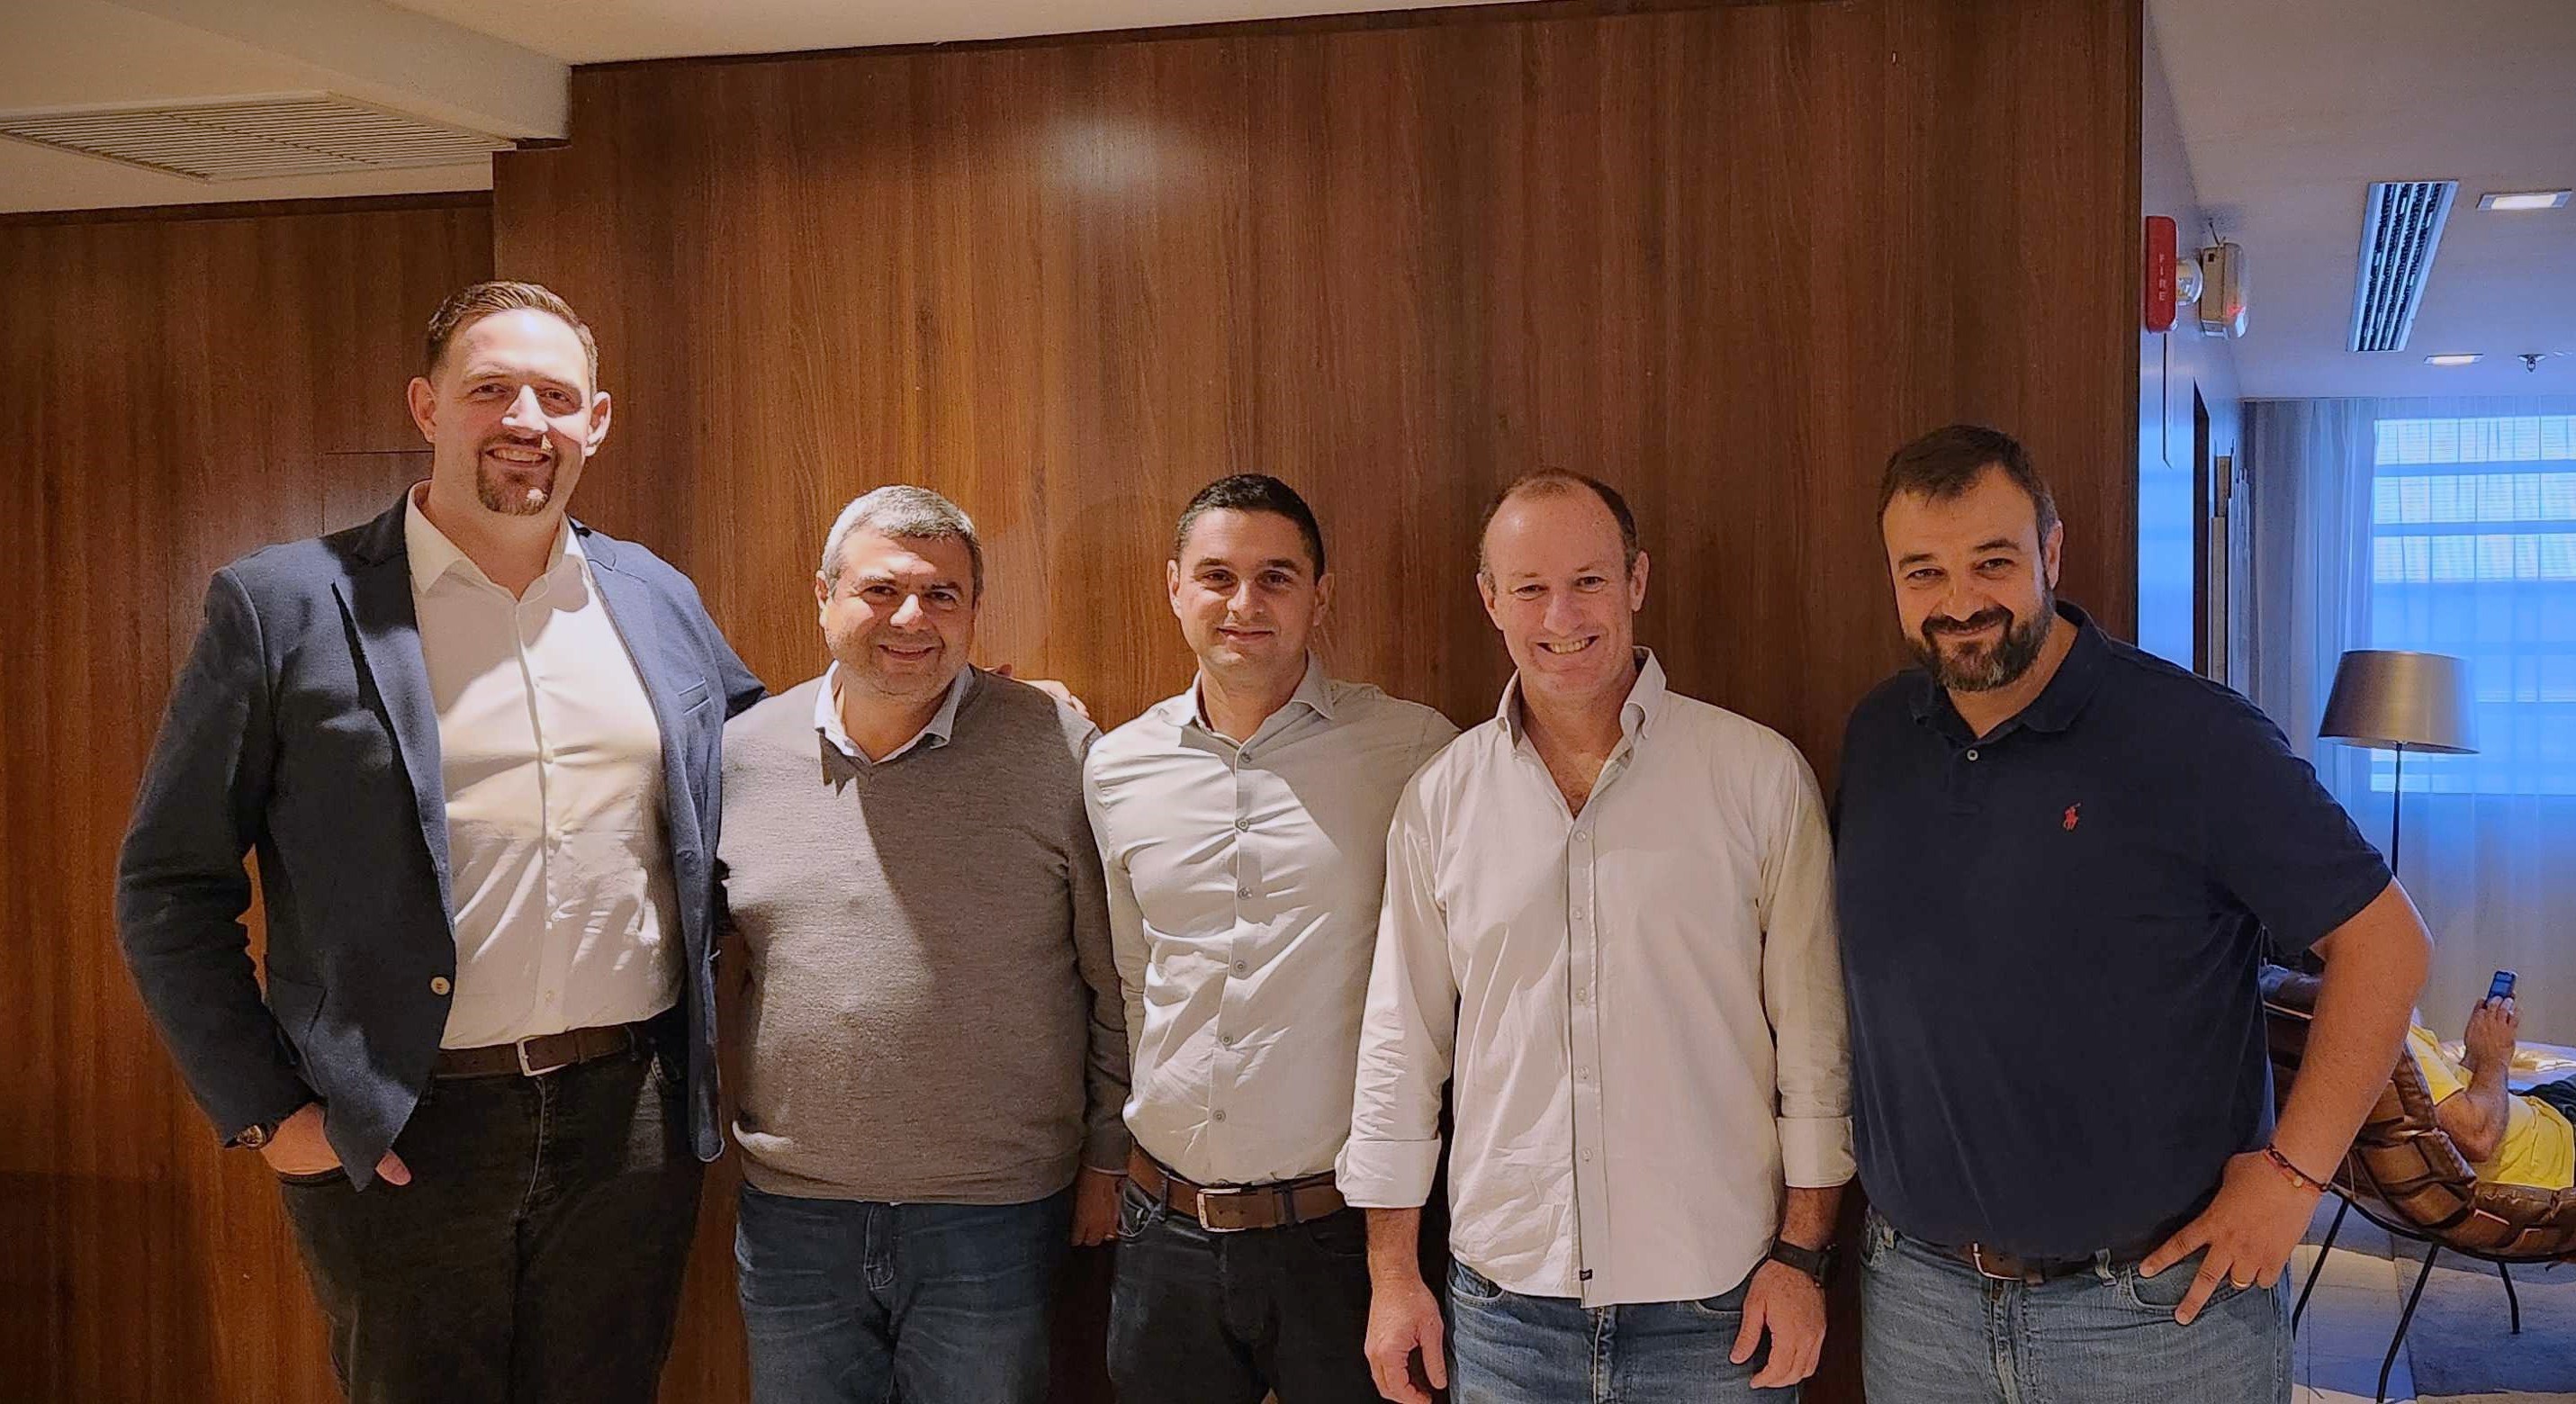 From left to right: Dave Joshua, chief revenue officer at Optibus; José Roberto Iasbek Felício, president of the Niff Group; Amos Haggiag, CEO and co-founder of Optibus; Ronen Avraham, Optibus General Manager for Latin America; and Victor Celada, Director of Optibus in Brazil.